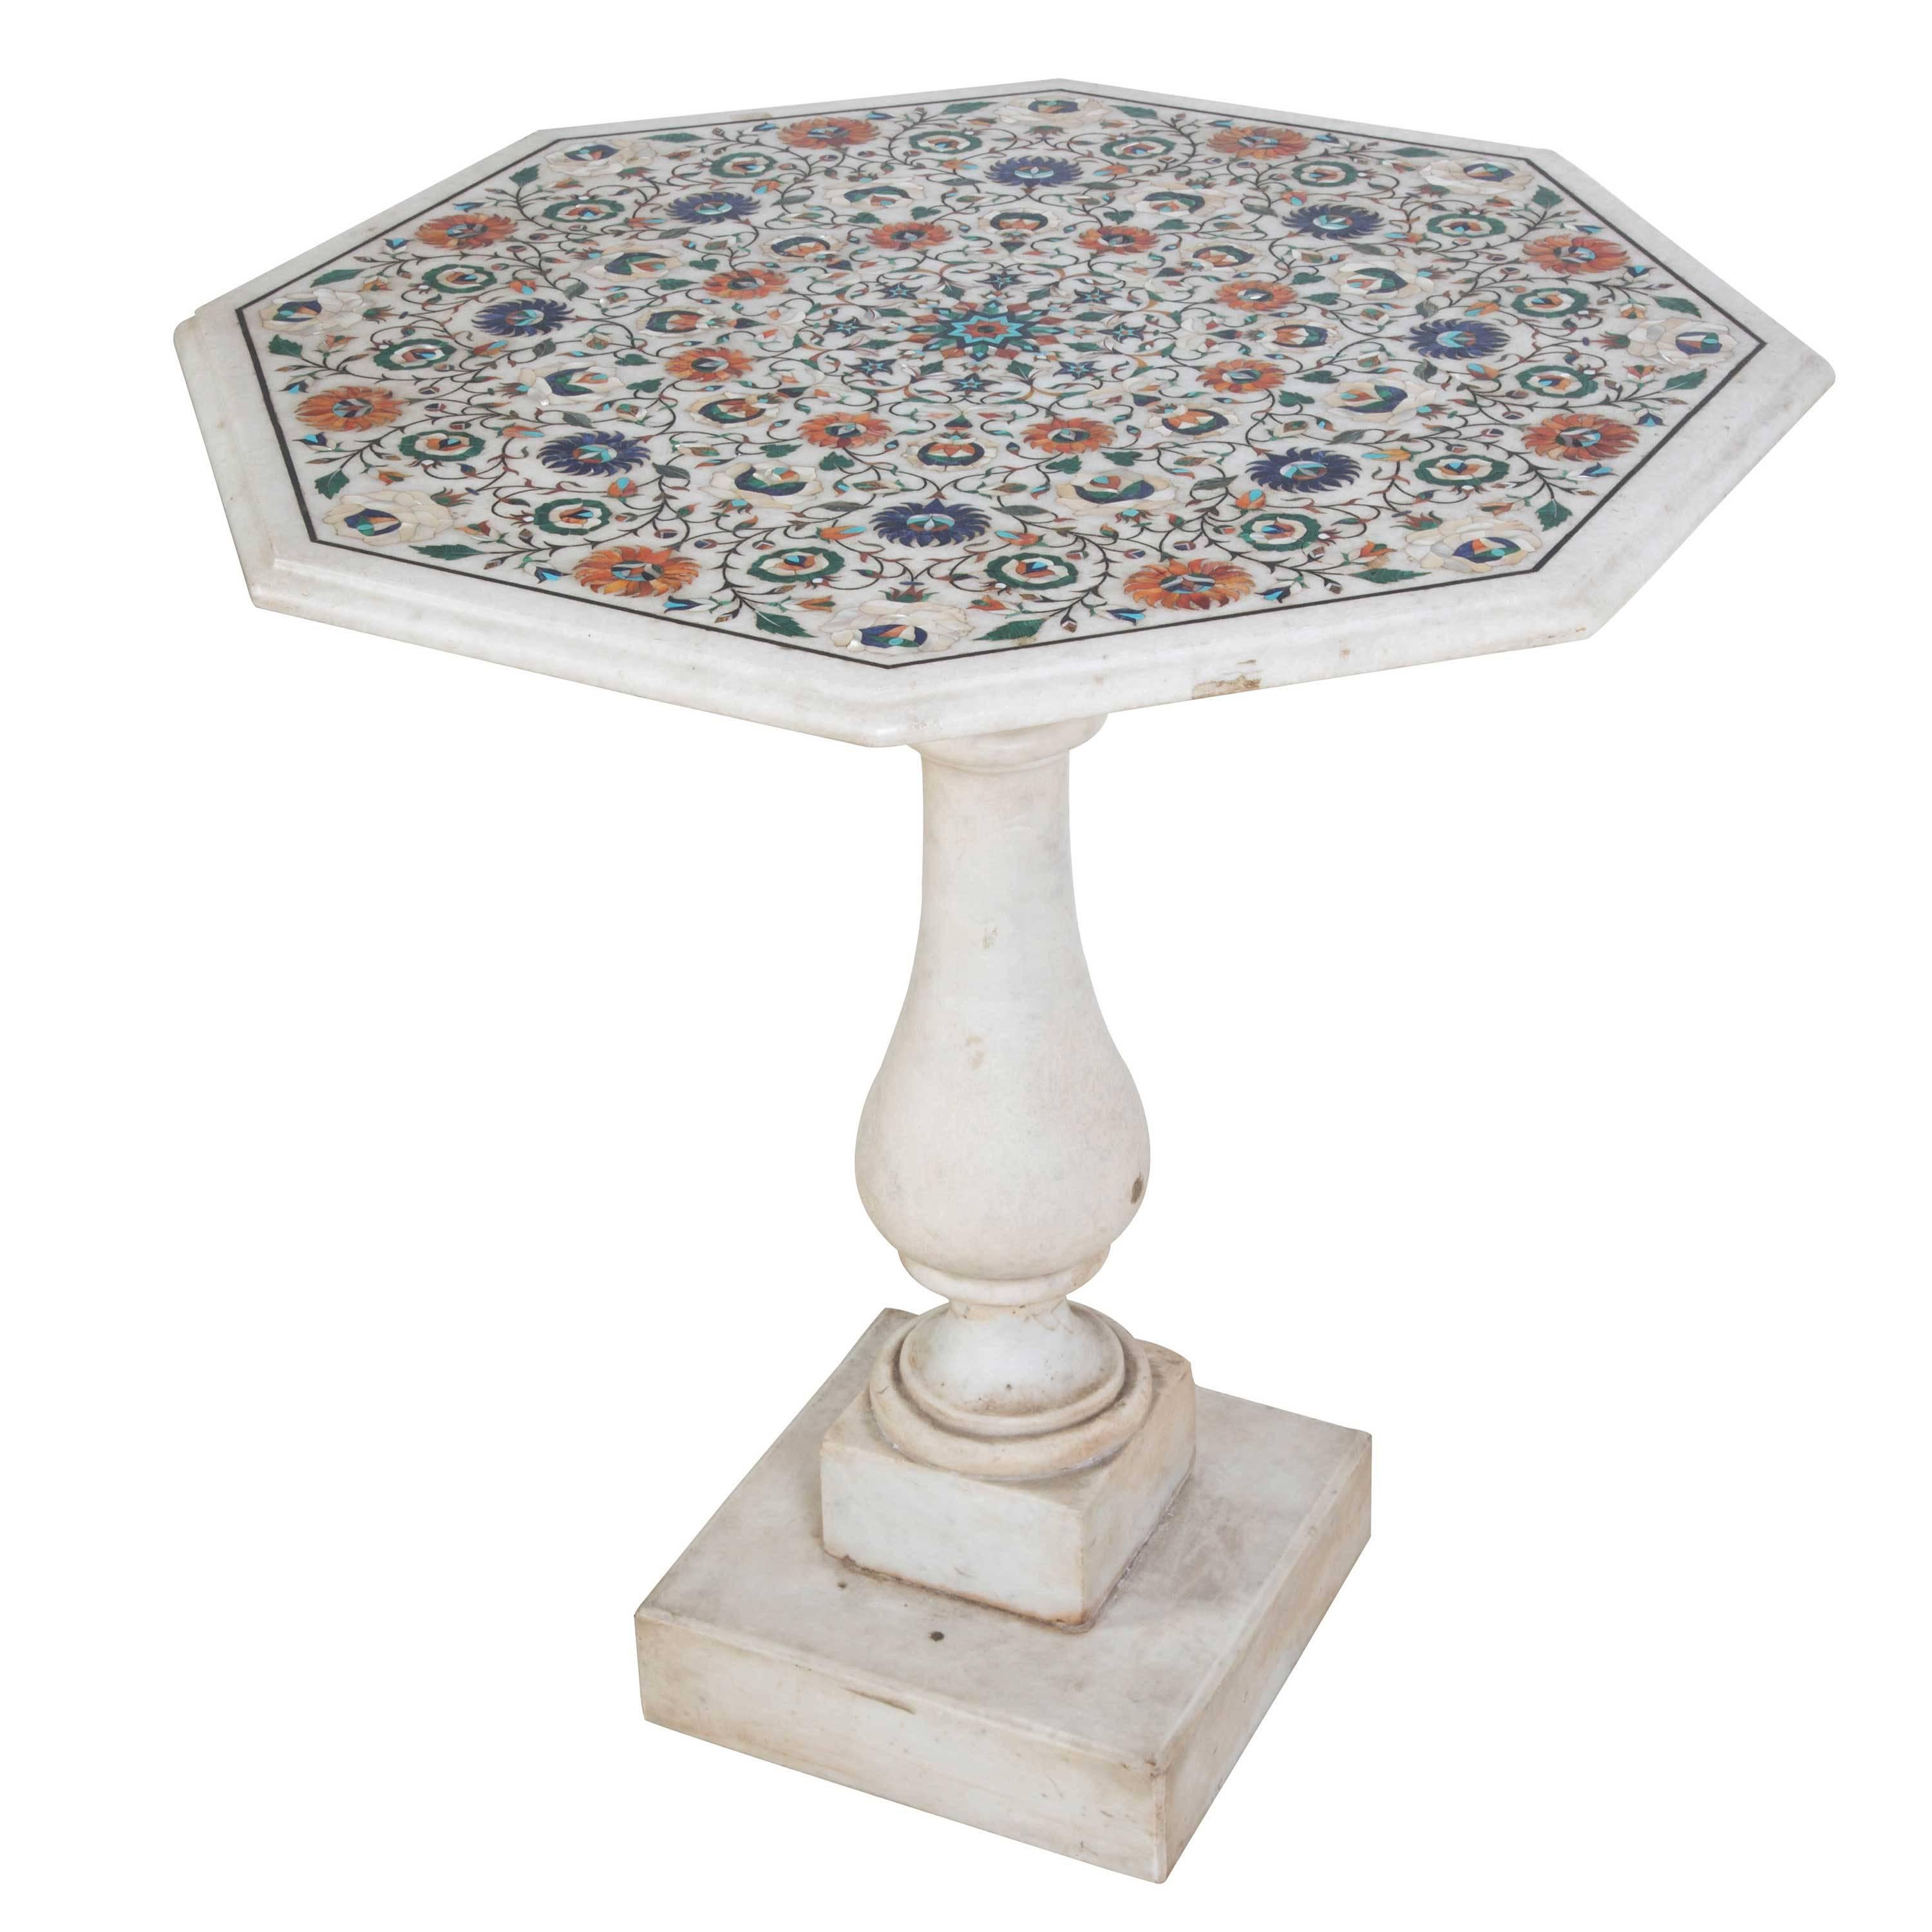 Extremely beautiful Italian hexagonal inlaid floral mosaic and marble table c.1920. 